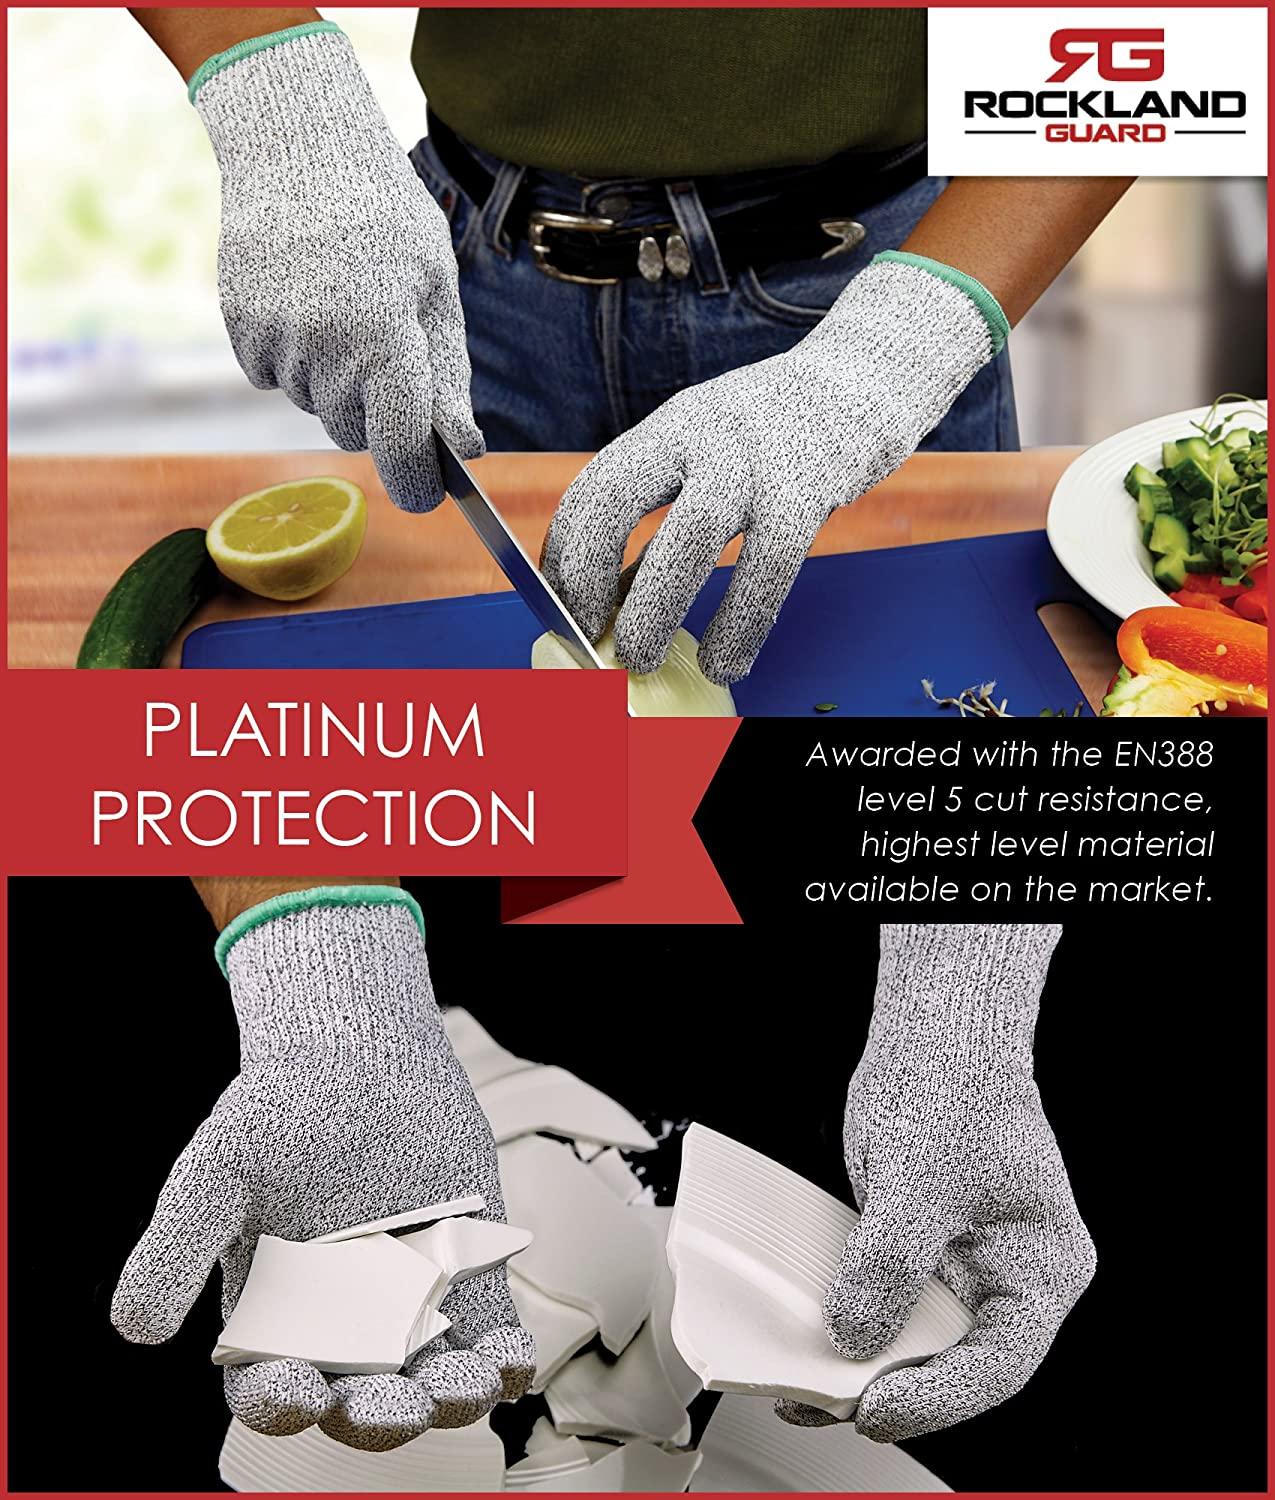 Level 5 Protection Cut Resistant Food Grade Safety Gloves